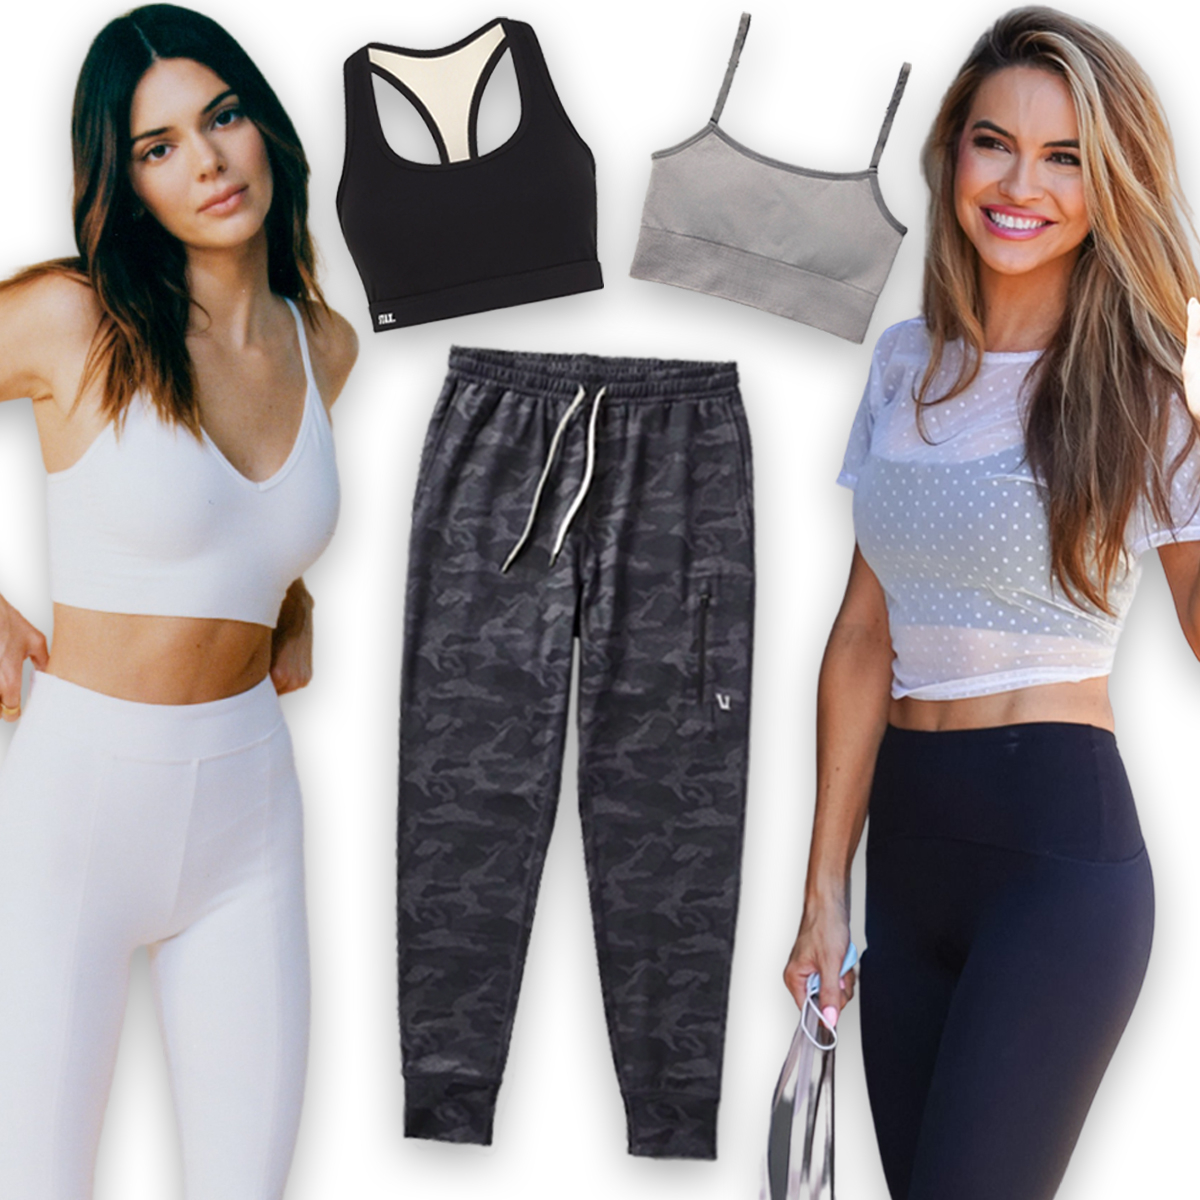 Athleta: Cute Workout Clothes. Chic Athleisure. Still Obsessed